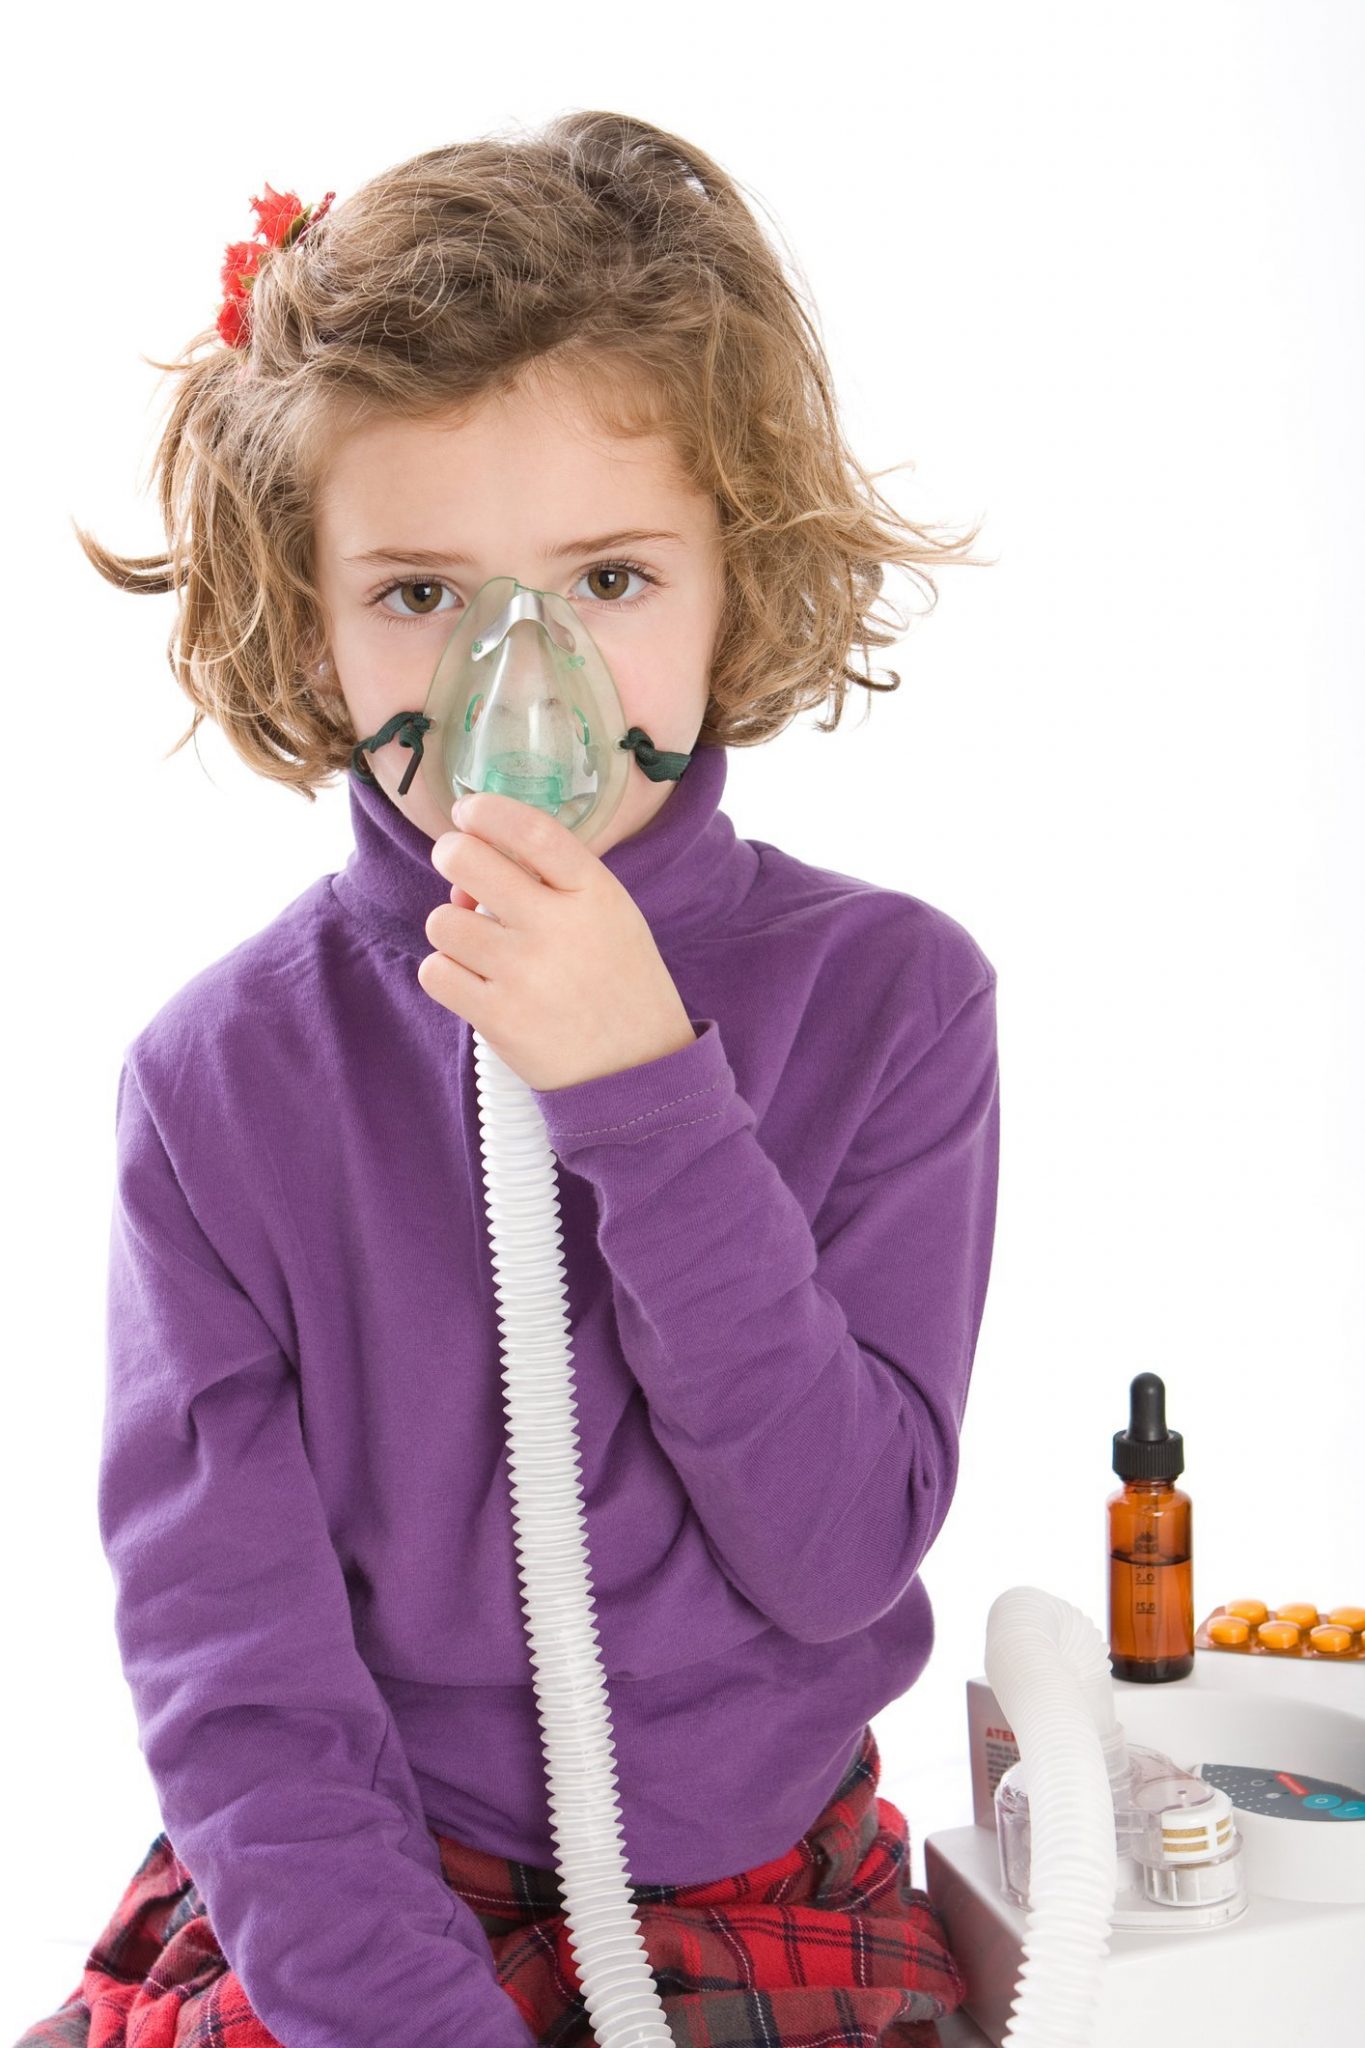 Will my child outgrow asthma?